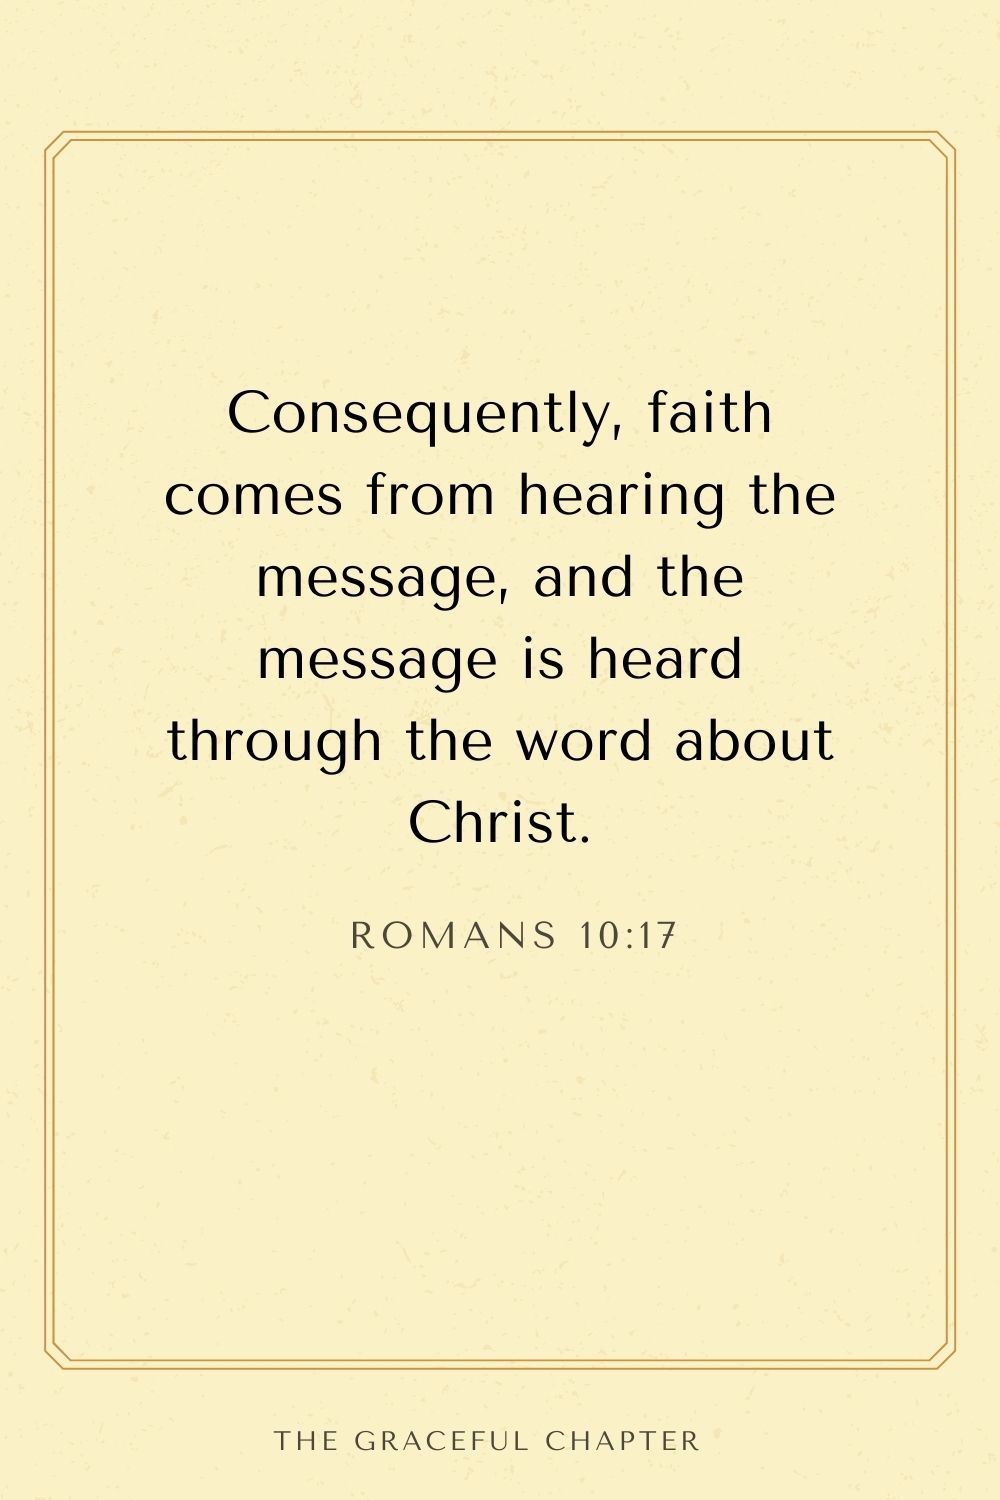 Consequently, faith comes from hearing the message, and the message is heard through the word about Christ. Romans 10:17